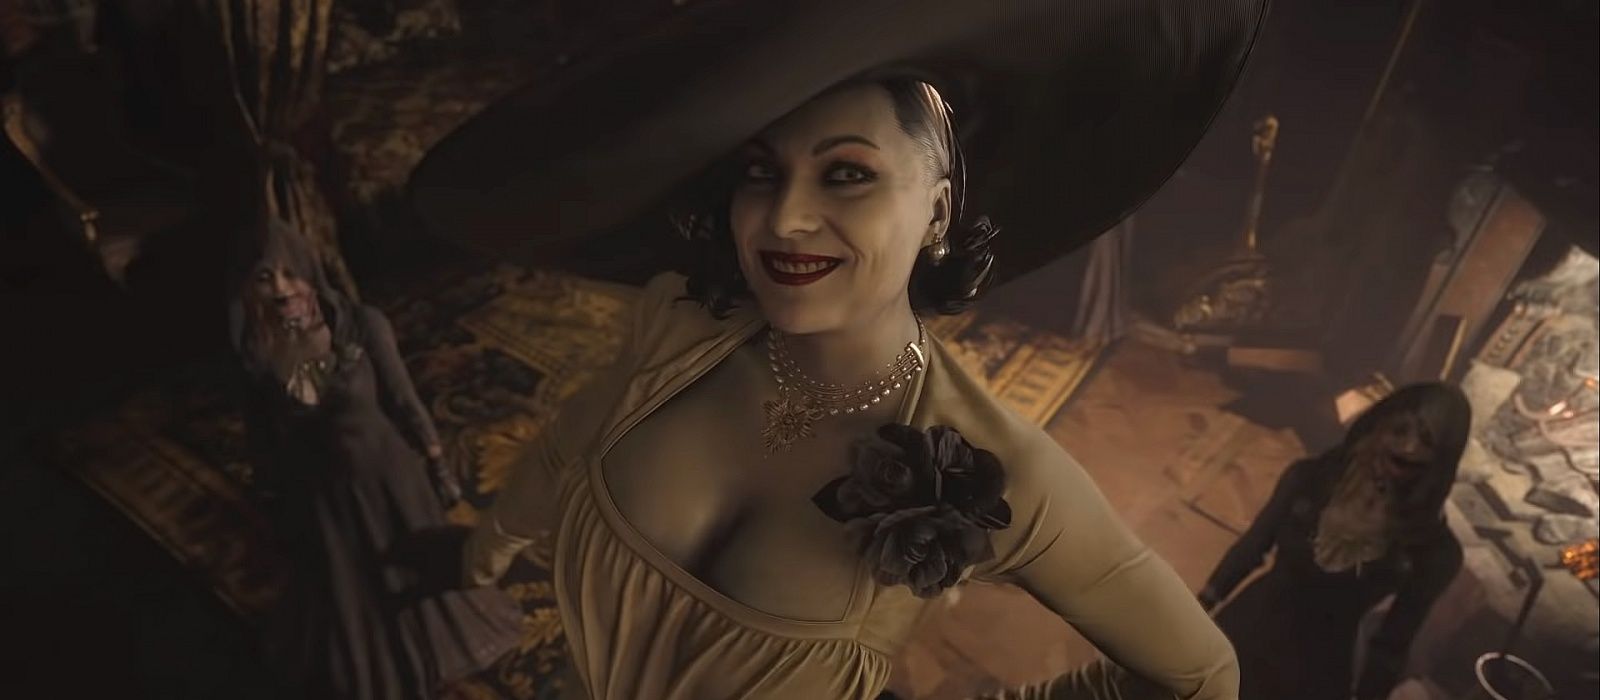 Busty vampire from Resident Evil Village has become a star of memes and fan art